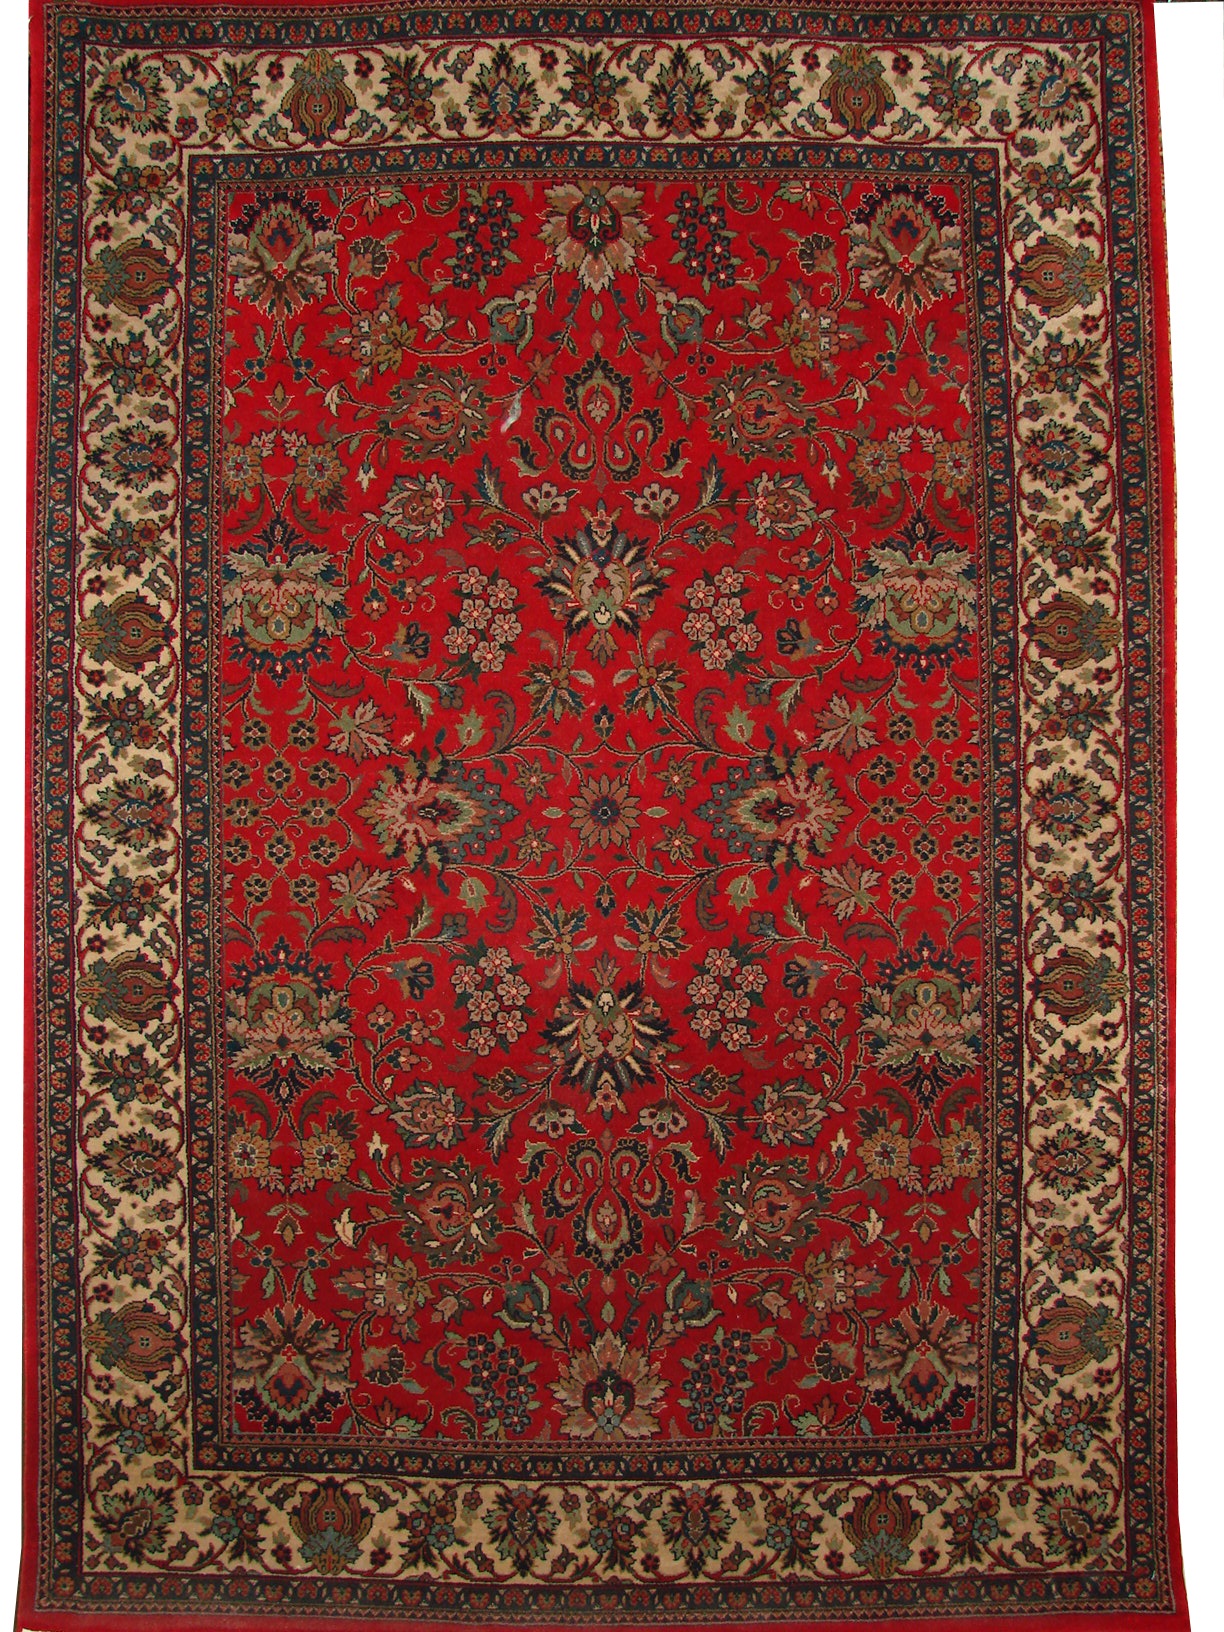 Clearance & Discount Rugs Keshmar 11x55 04074 Red - Burgundy & Ivory - Beige Hand Knotted Rug